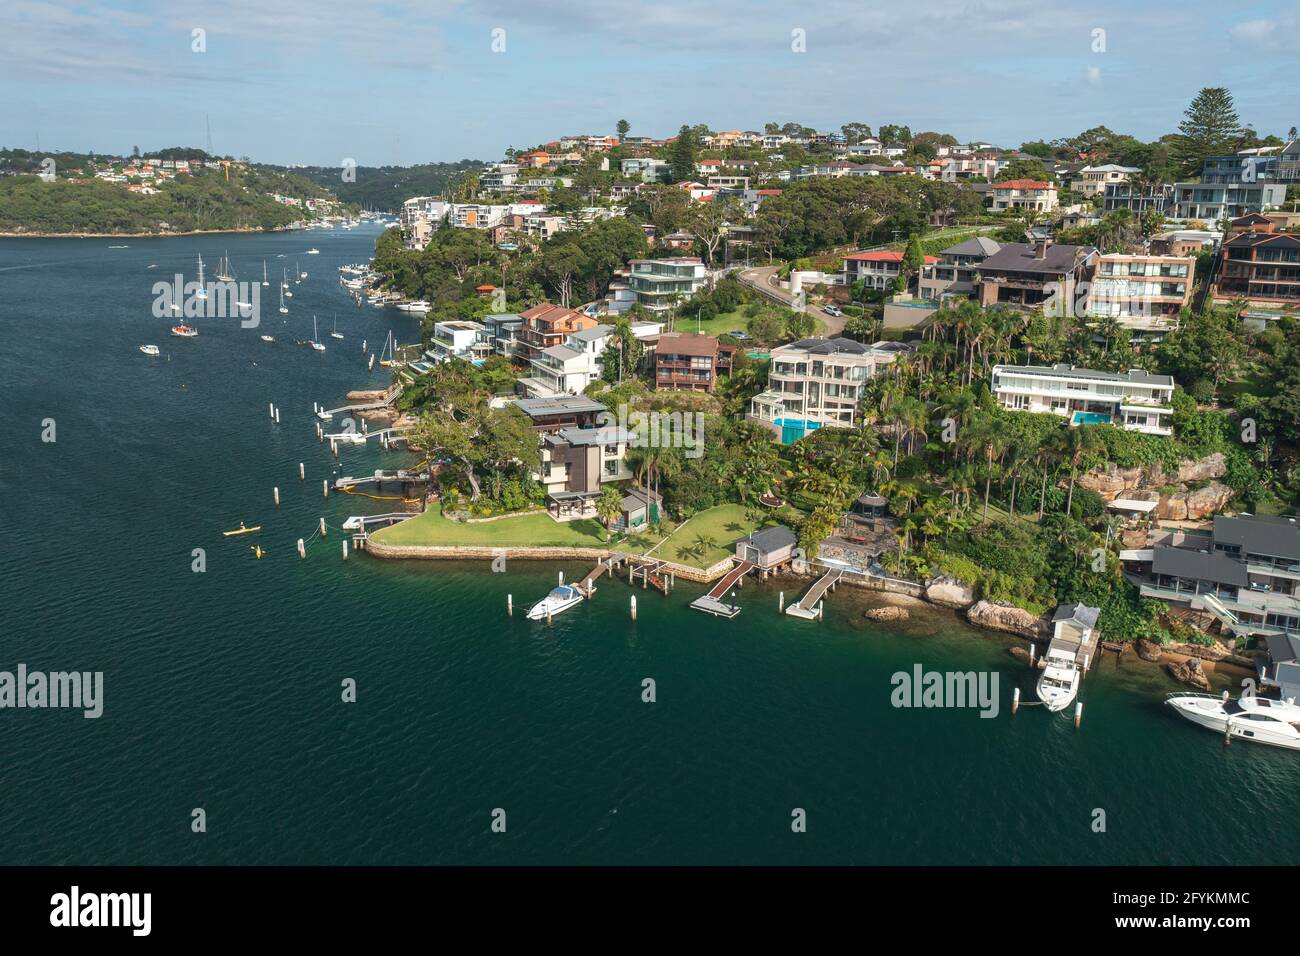 Aerial view of prestige houses along the harbour in the Sydney suburb of Seaforth, NSW, Australia. Stock Photo